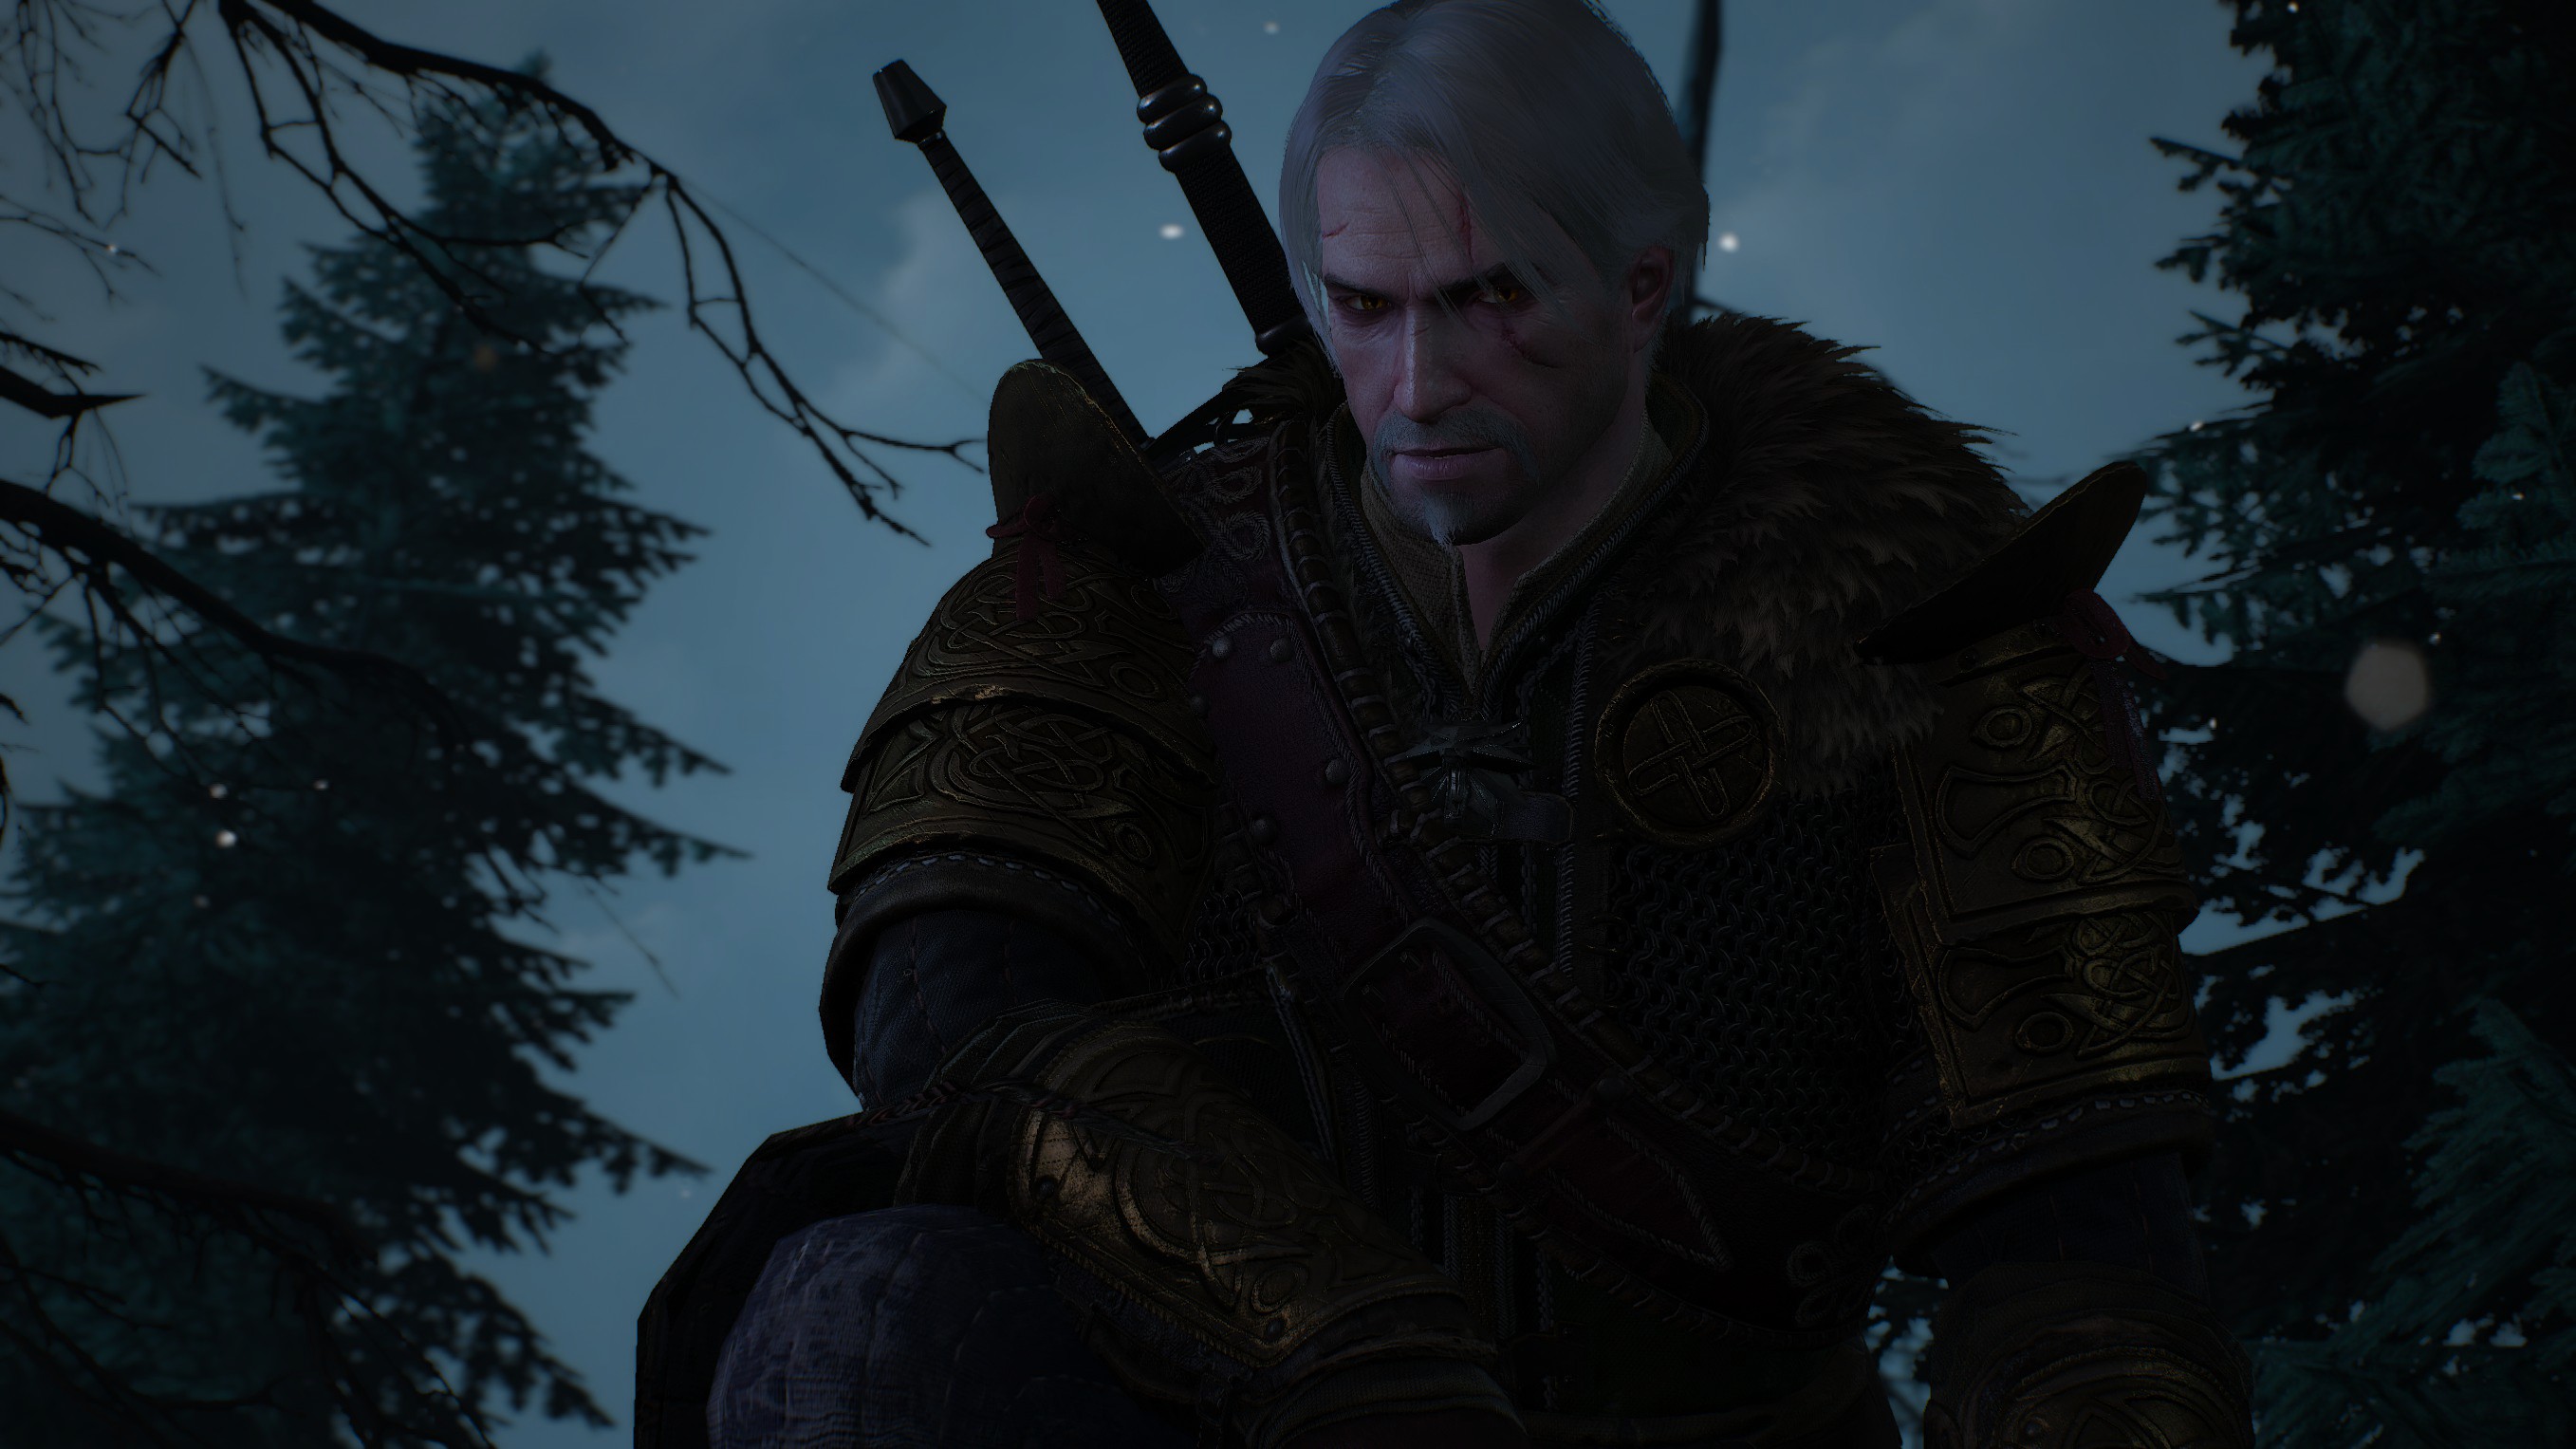 General 2715x1527 The Witcher 3: Wild Hunt Skellige Geralt of Rivia screen shot video games video game characters PC gaming video game men